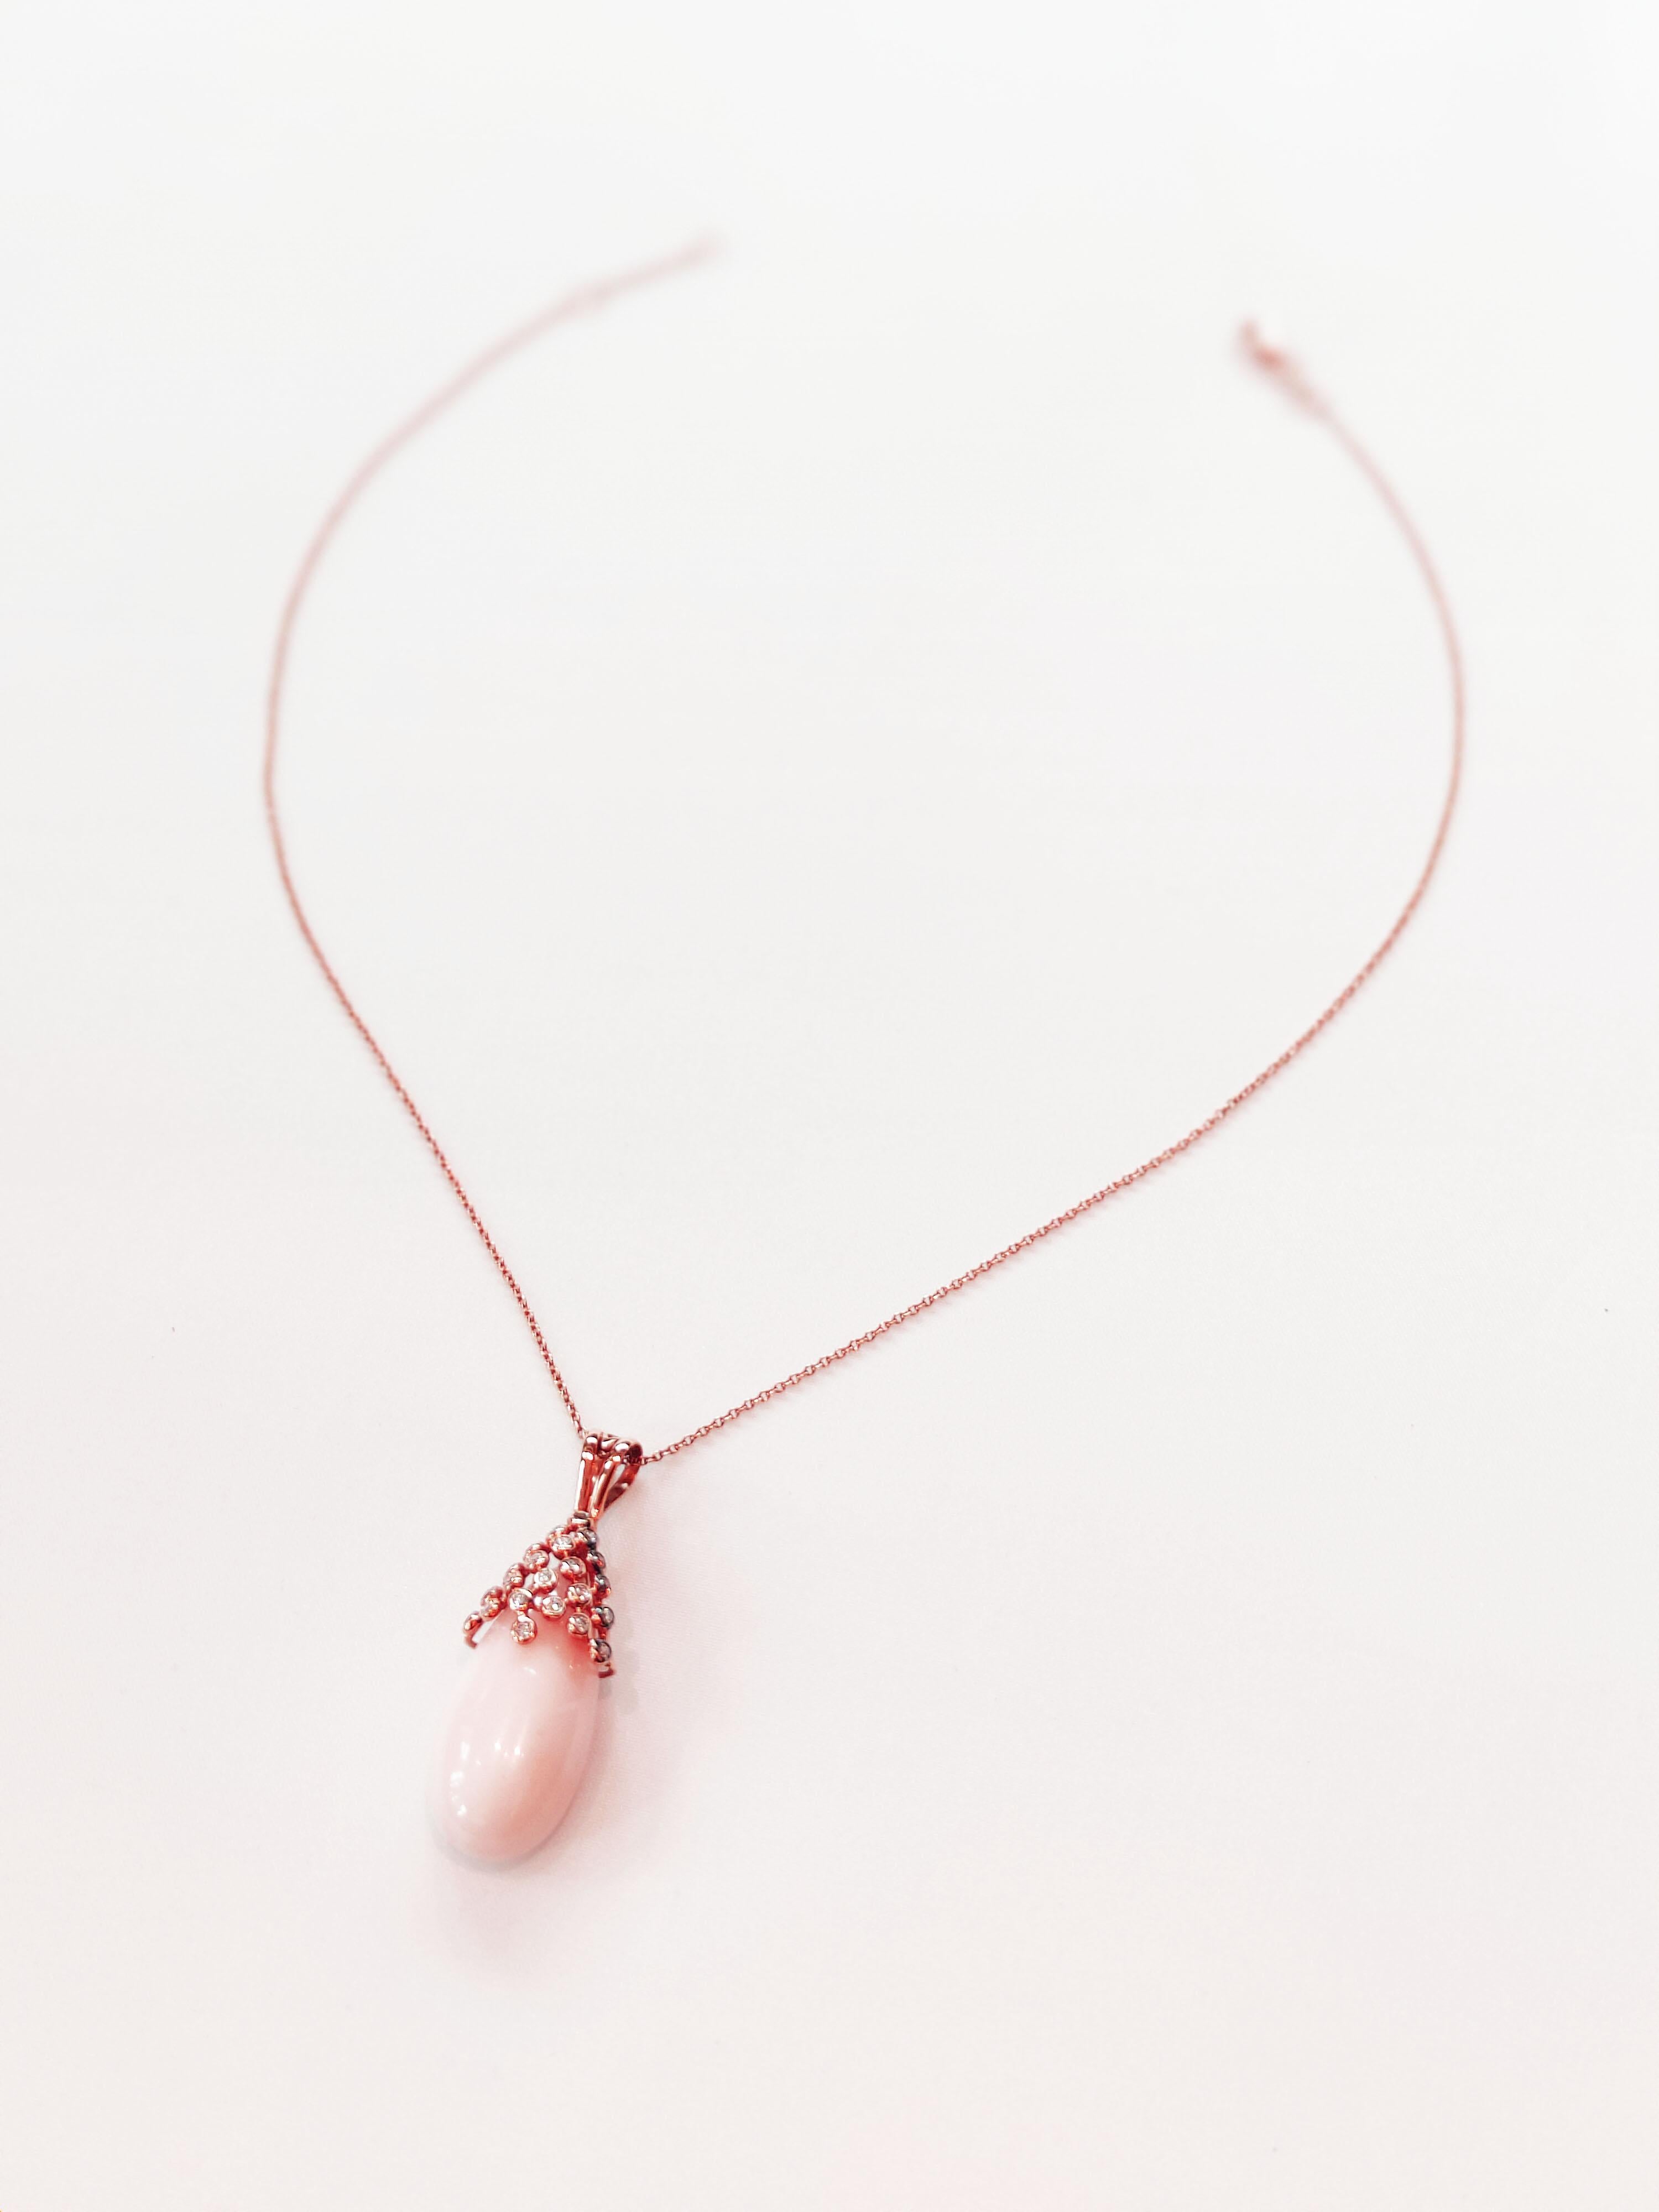 Stunning, delicate, 18 karat rose gold Angel skin coral pendant with filigree.
11 diamonds, a total of 0.20 carat, are set on the pendant. The total length of the pendant including bail is 44mm. The coral is slightly more pink than on the